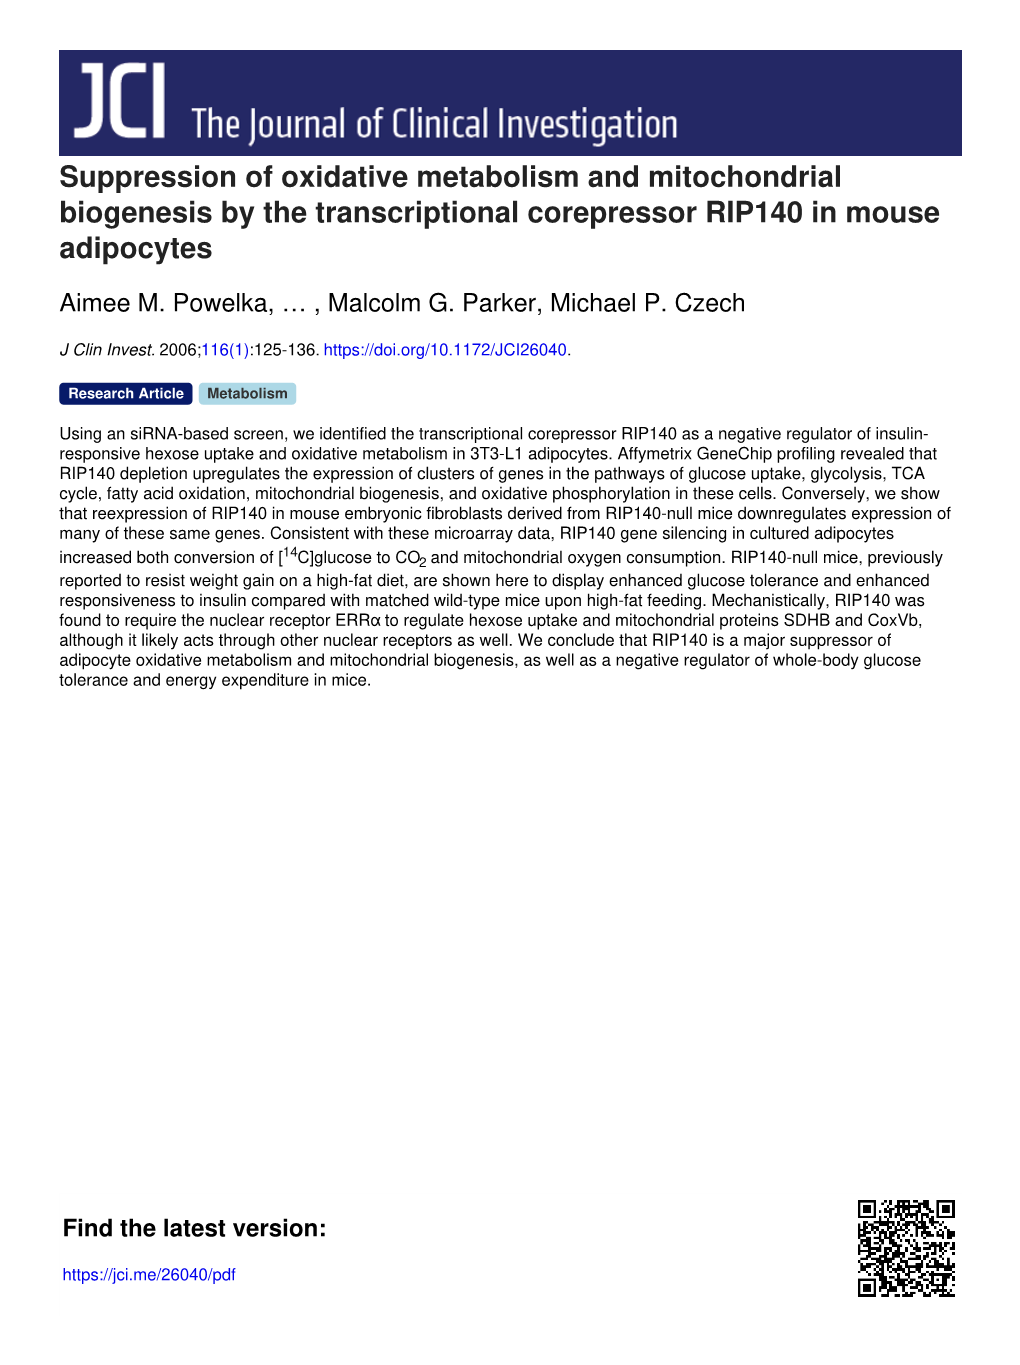 Suppression of Oxidative Metabolism and Mitochondrial Biogenesis by the Transcriptional Corepressor RIP140 in Mouse Adipocytes